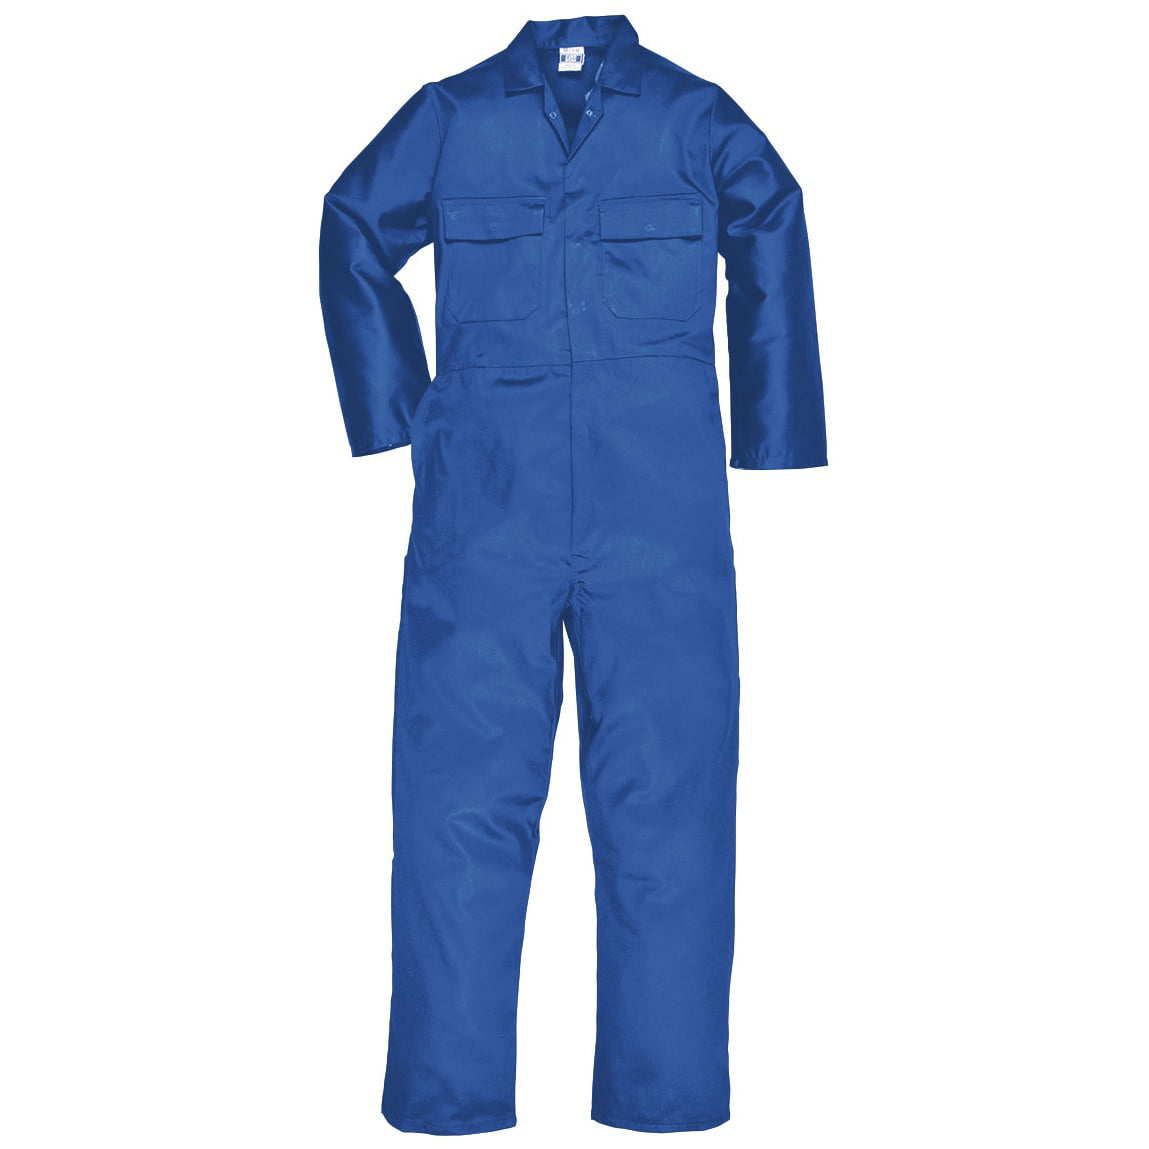 SMALL TO 5XL,STUD PORTWEST COVERALL,TALL LEG 33" NAVY BLUE,OVERALL,BOILER SUIT 